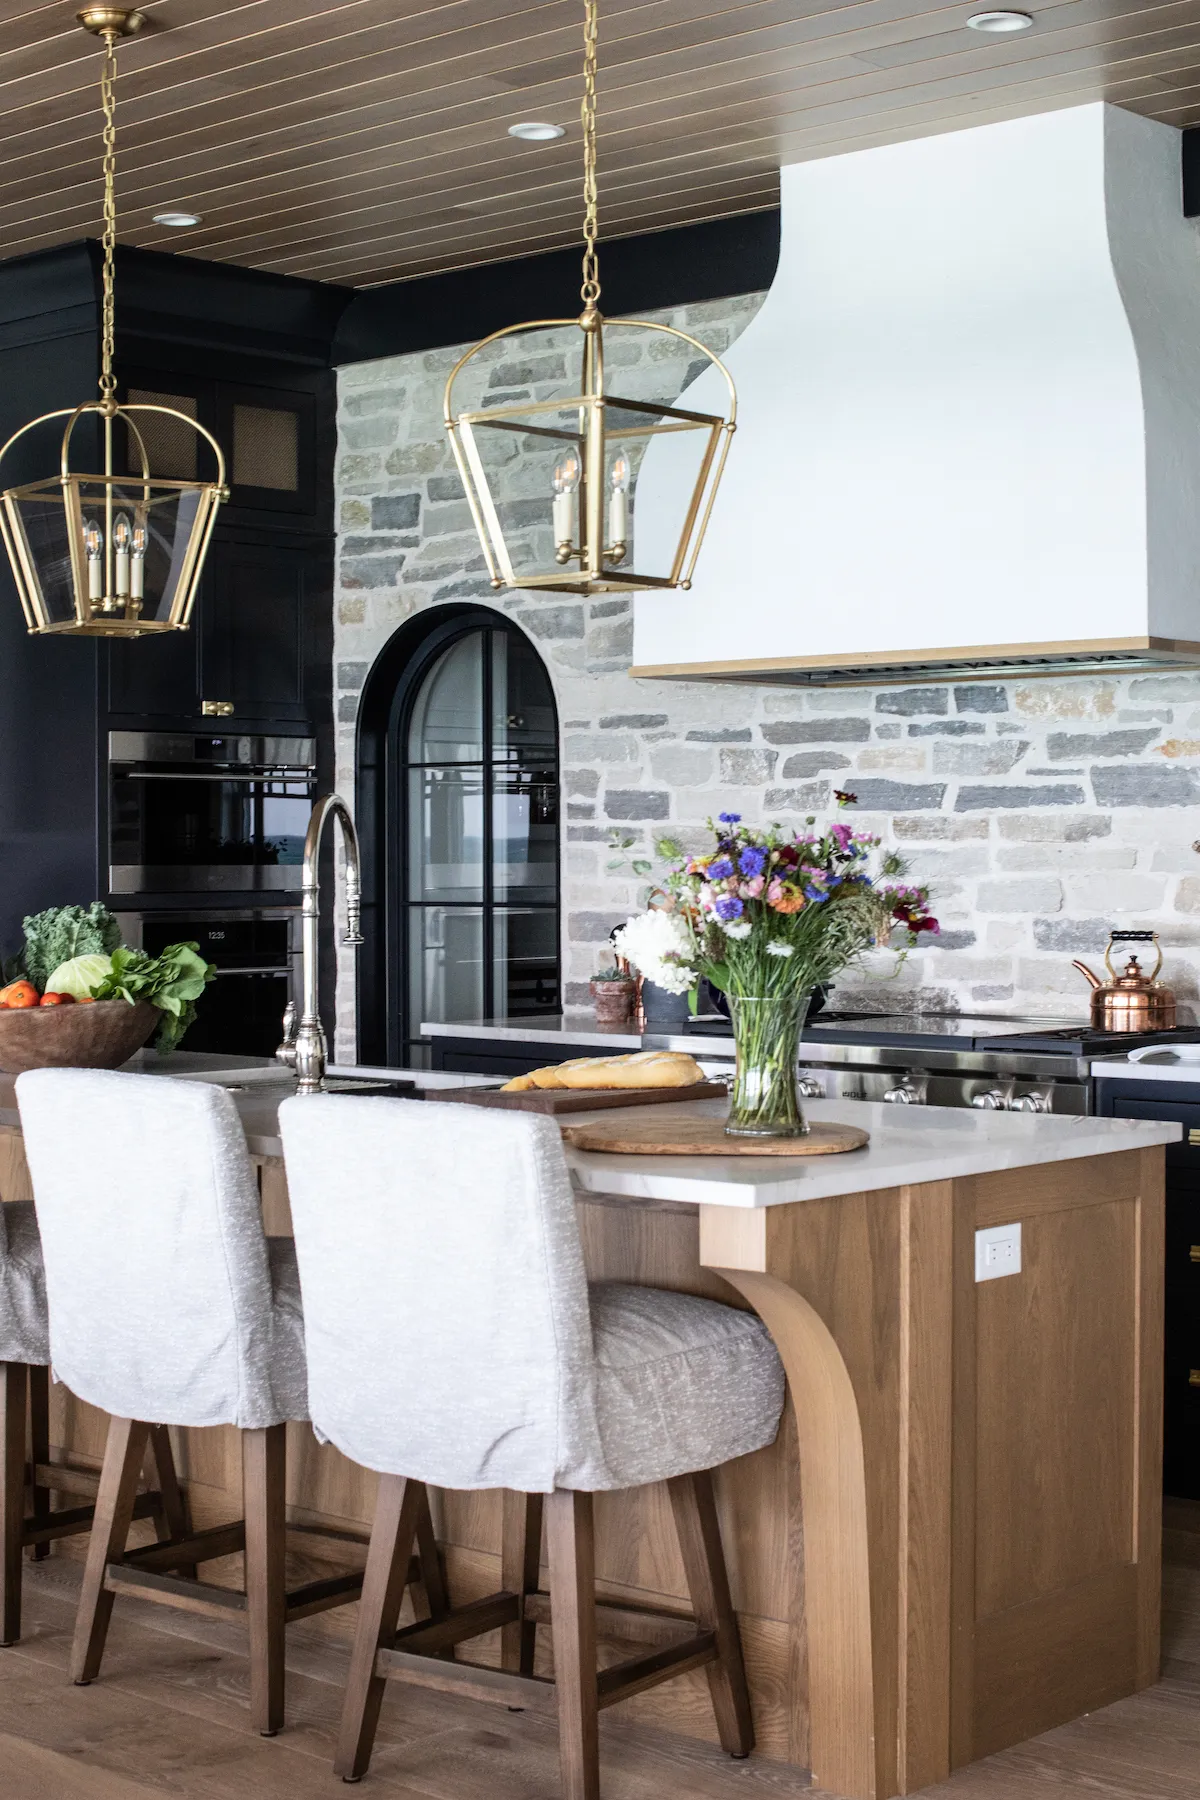 30 Best Modern Farmhouse Kitchens for 2023; here are some of the best farmhouse kitchen designs we will see more of in the coming year!